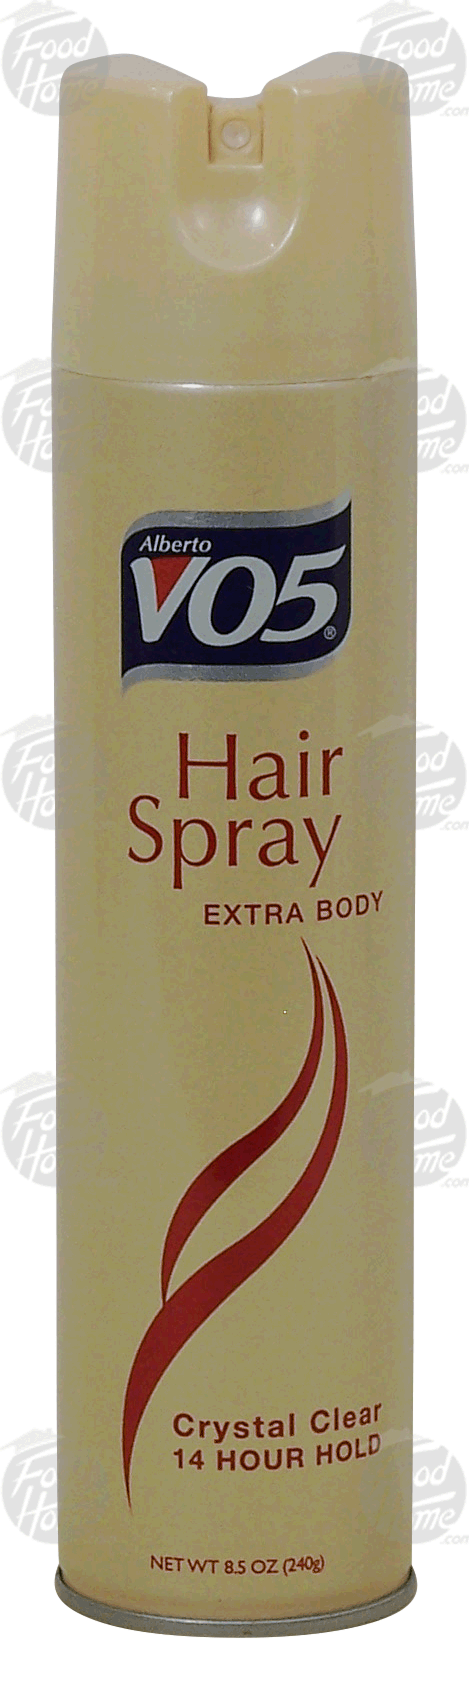 Groceries-Express.com Product Infomation for Alberto Vo5 hair spray ...